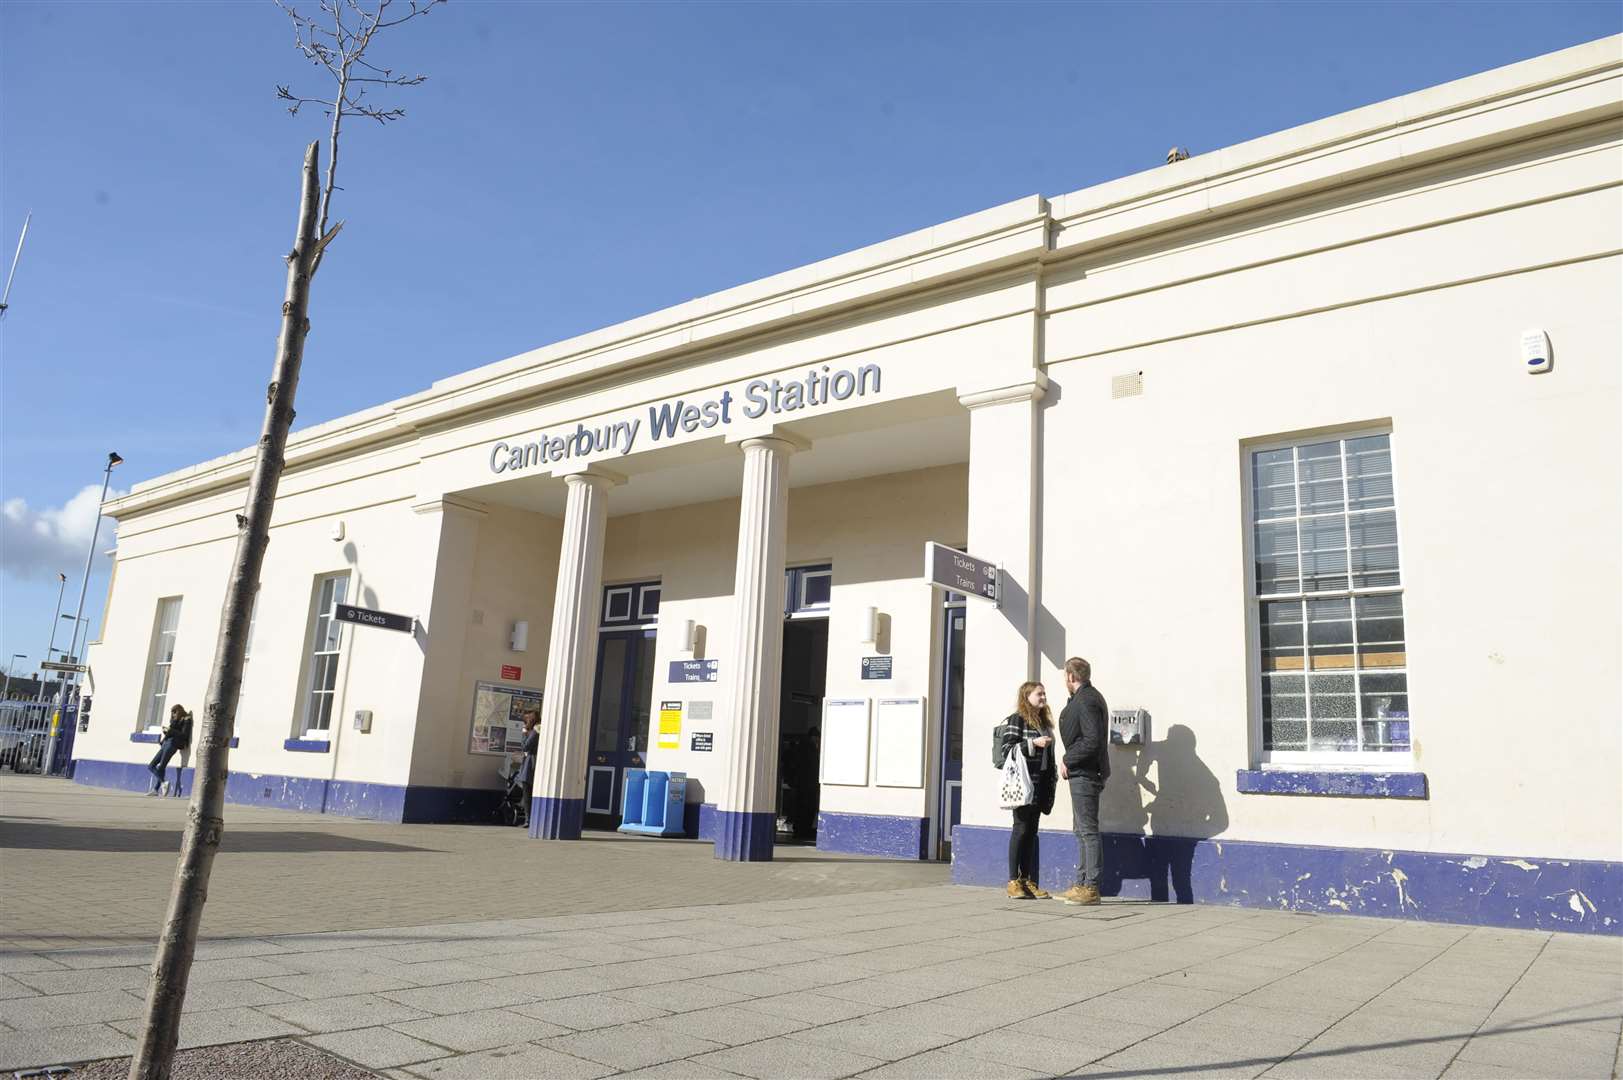 The incident happened at Canterbury West train station